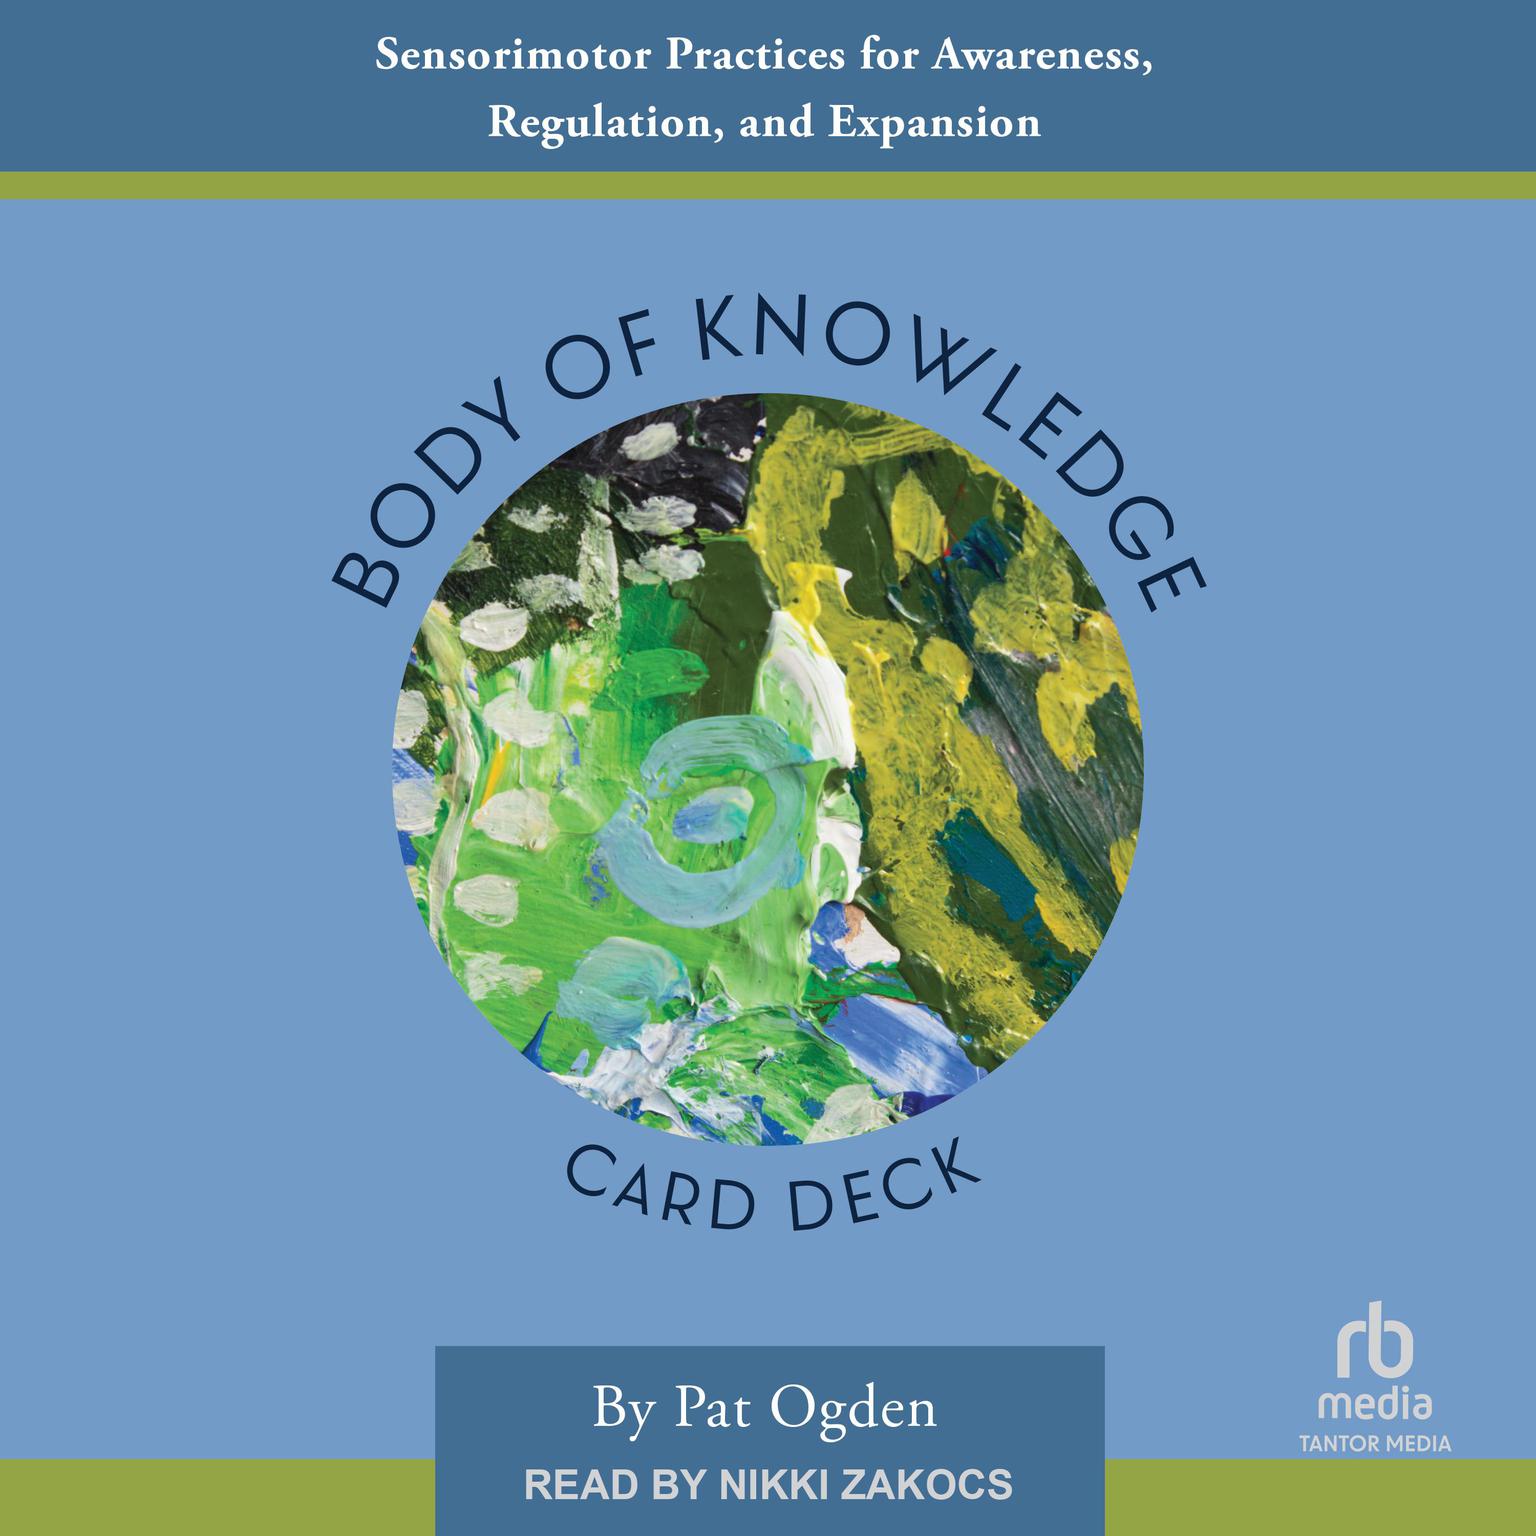 Body of Knowledge Card Deck: Sensorimotor Practices for Awareness, Regulation, and Expansion Audiobook, by Pat Ogden